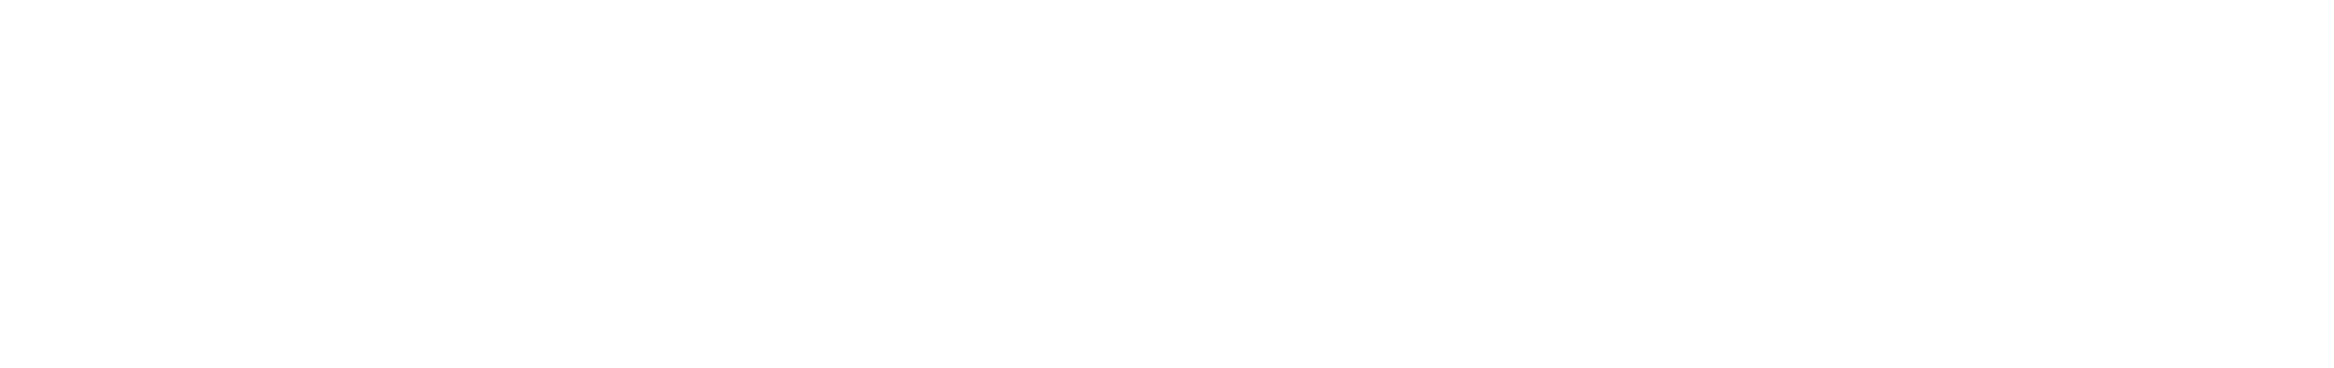 CrowdRiff Logo - Transparent icon with white text.png